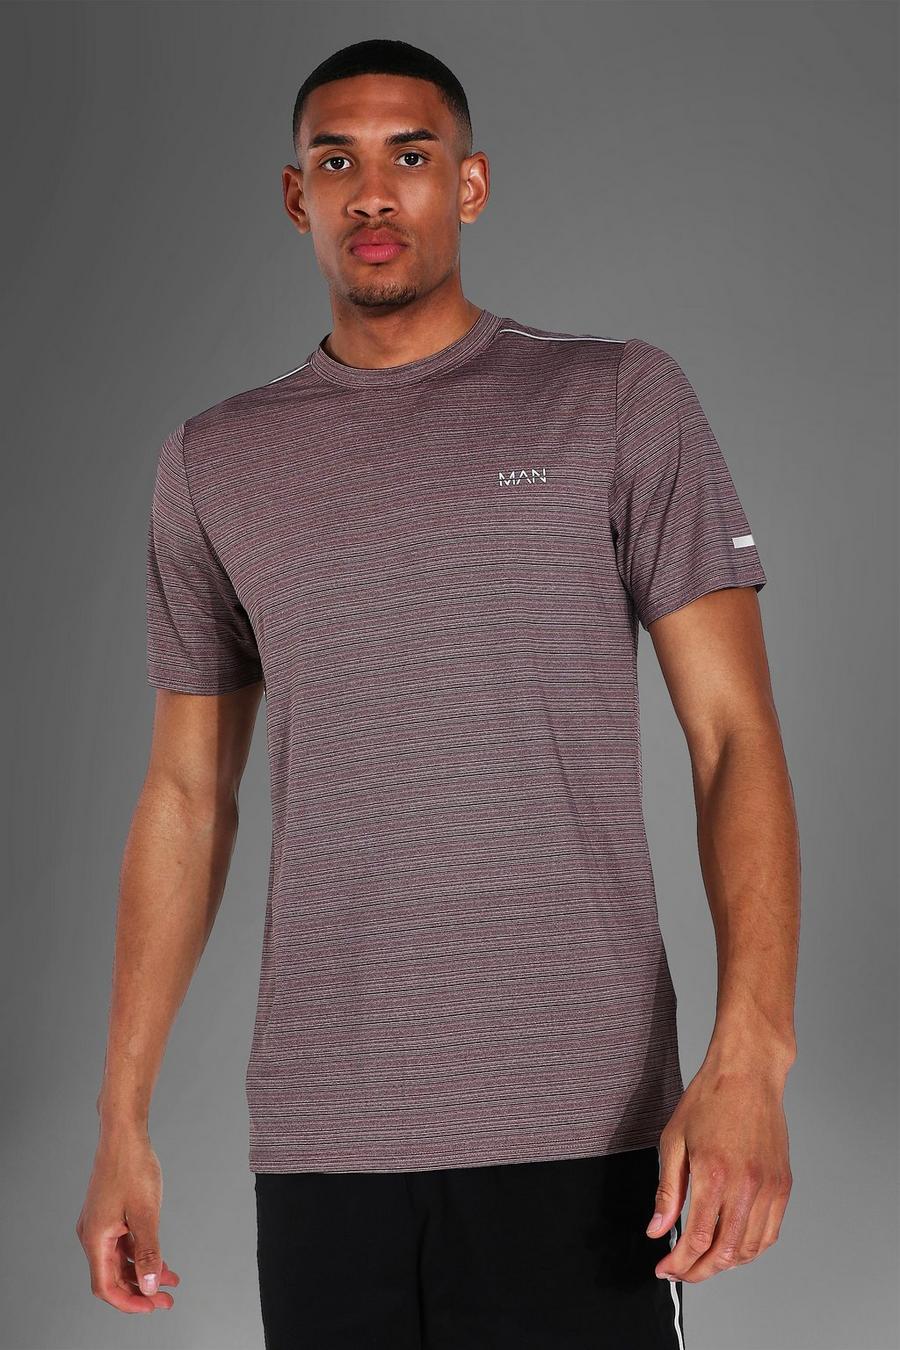 Charcoal grey Tall Man Active Textured T-shirt image number 1